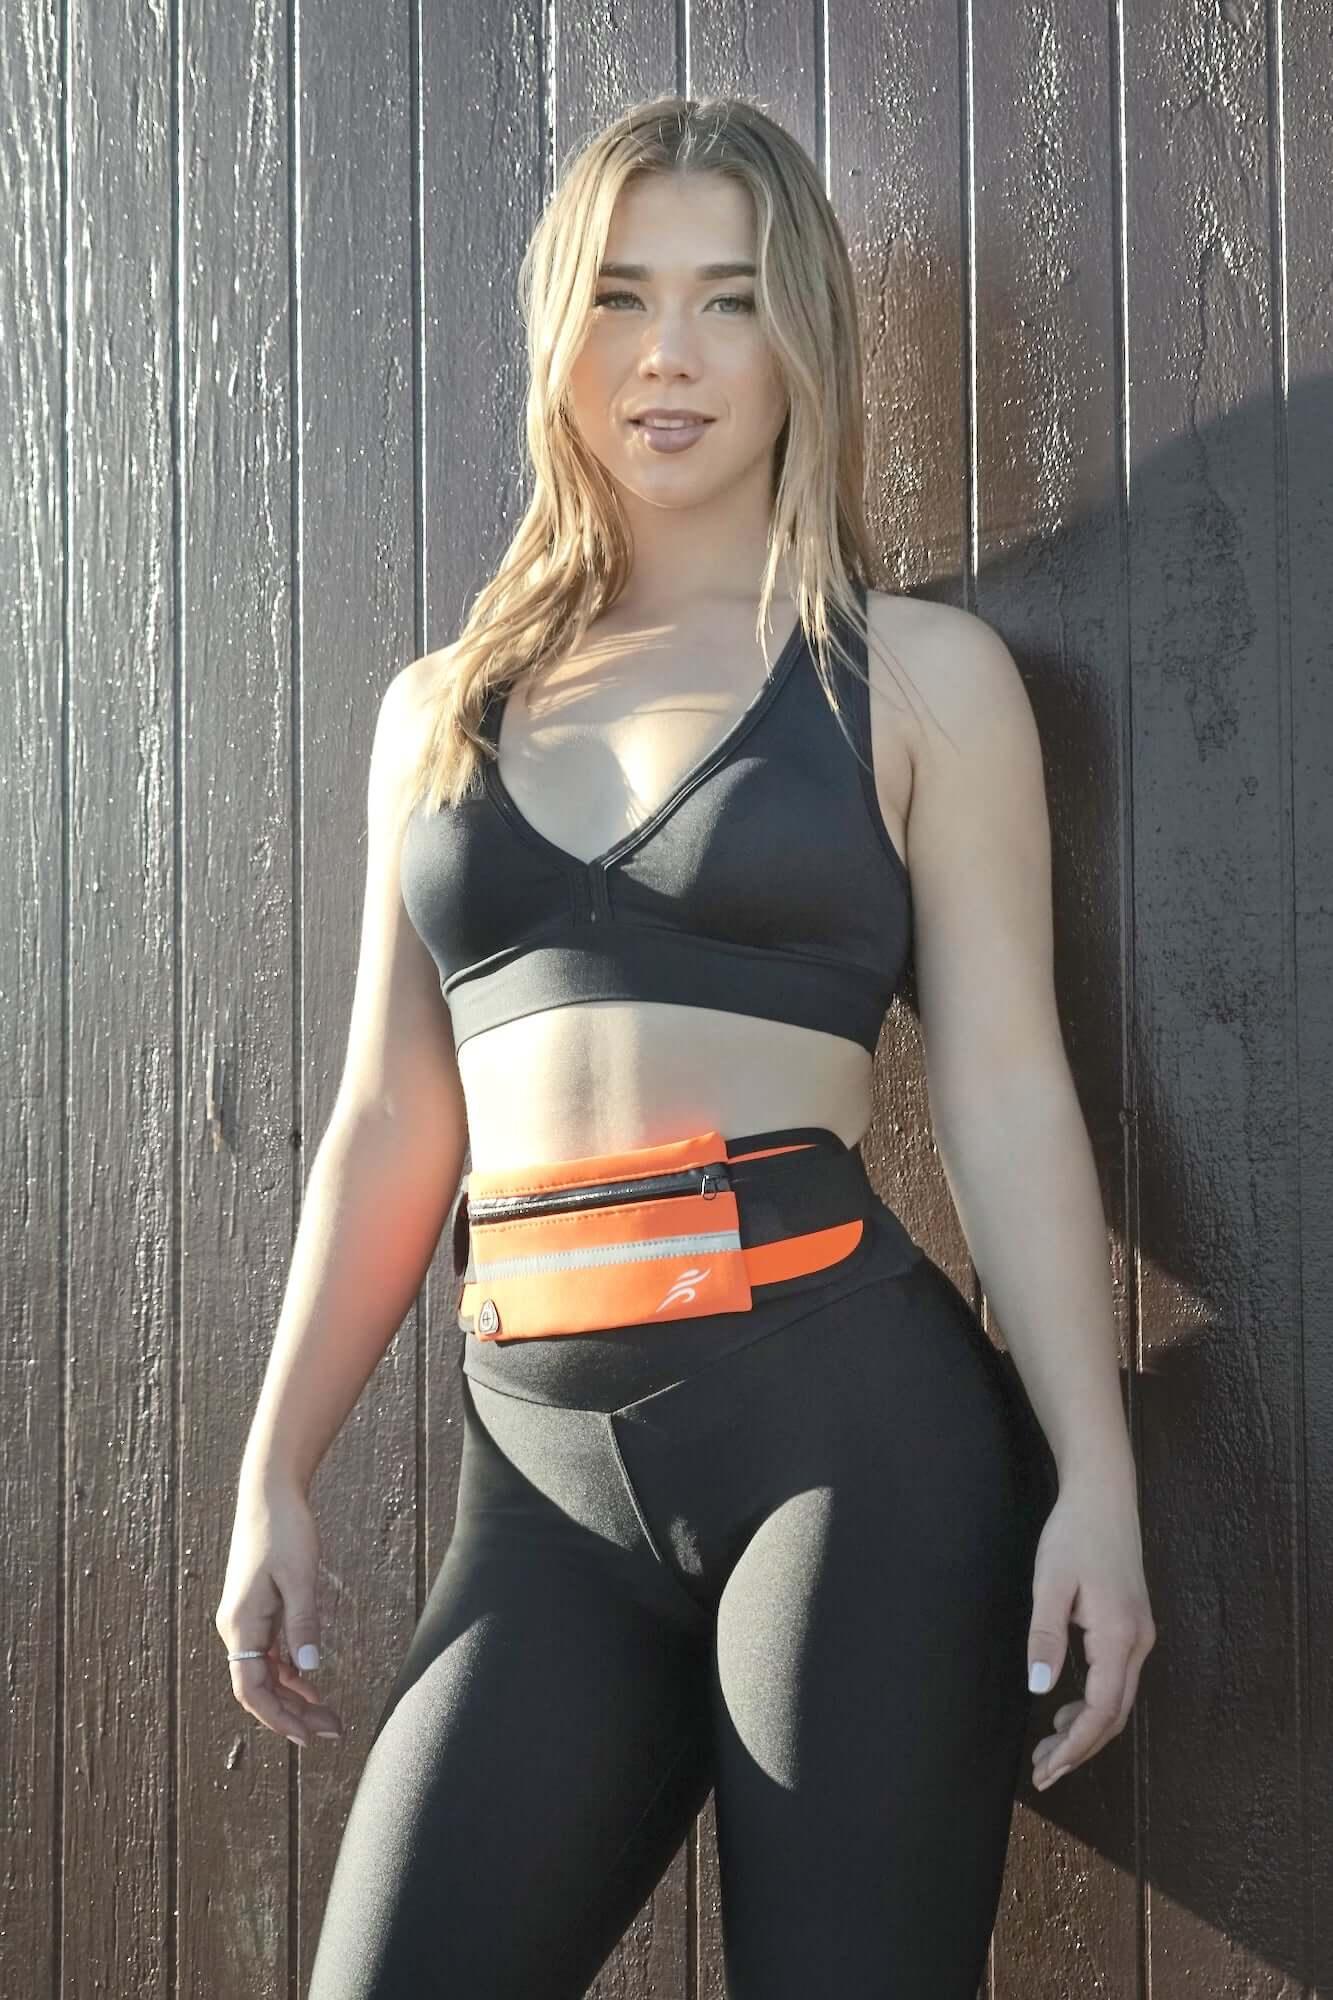 Velocity Water-Resistant Sports Running Belt and Fanny Pack for - VirtuousWares:Global